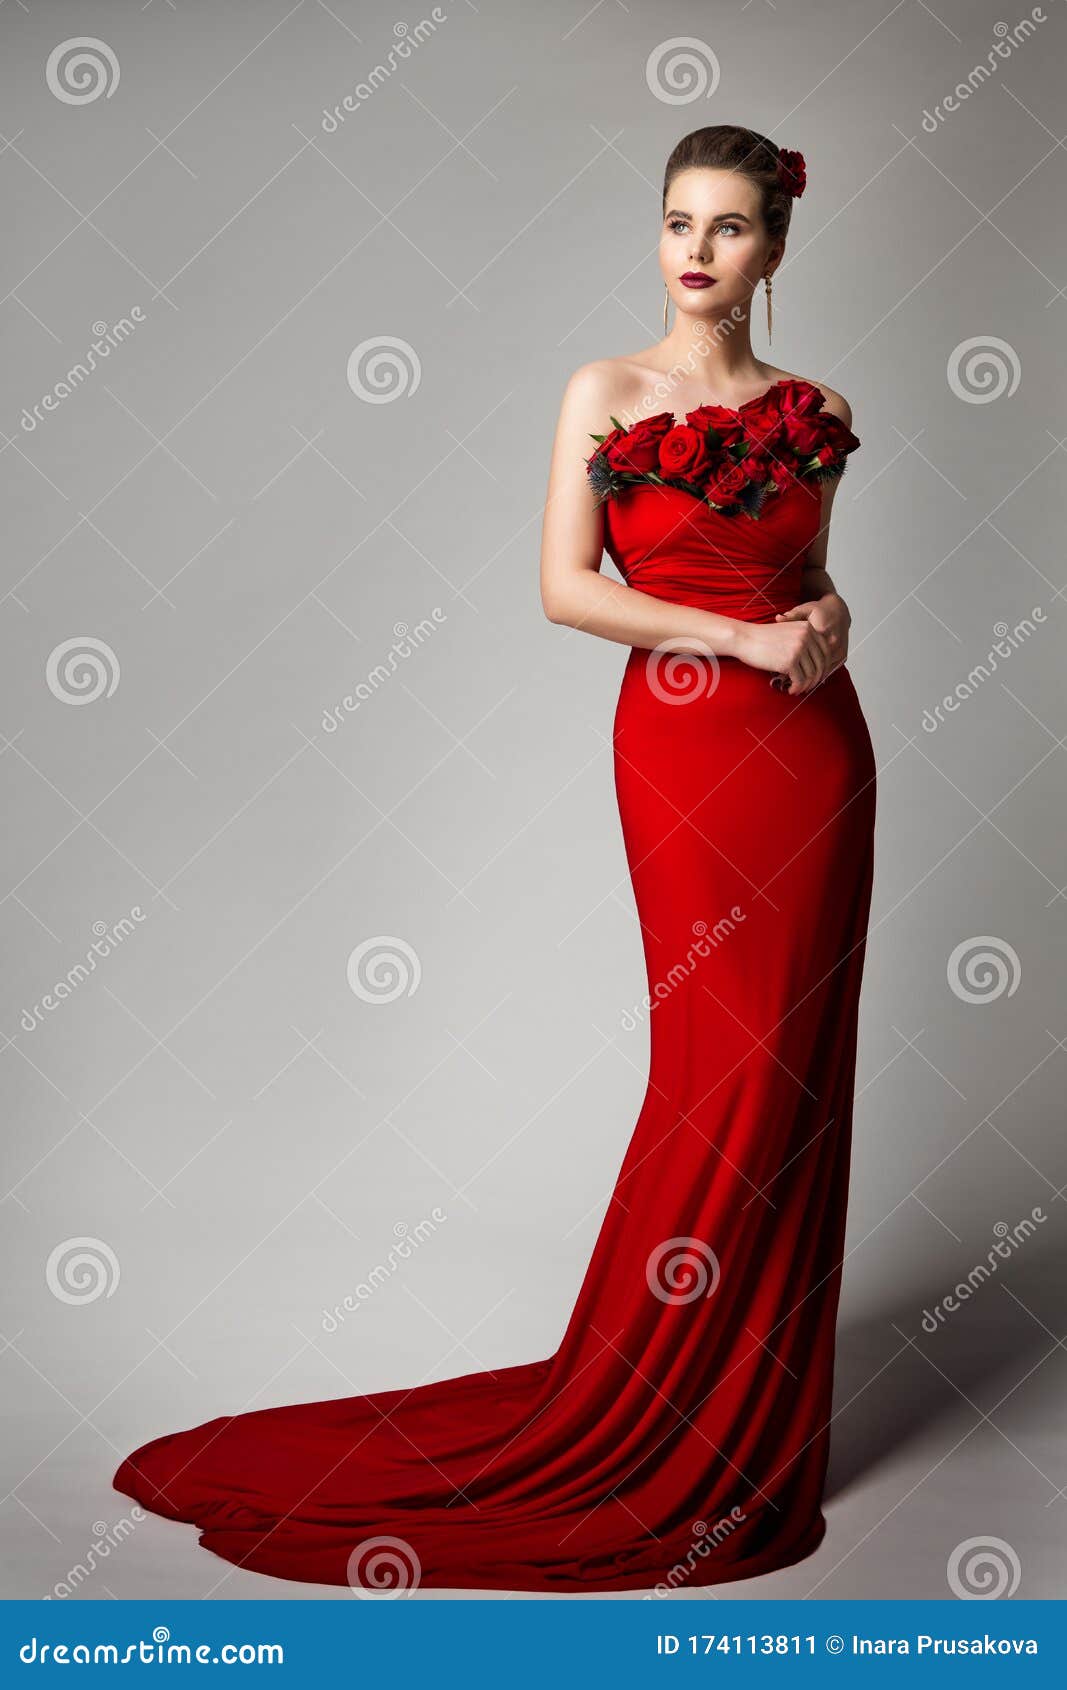 Woman in Red Evening Dress with Flowers Roses, Elegant Fashion ...